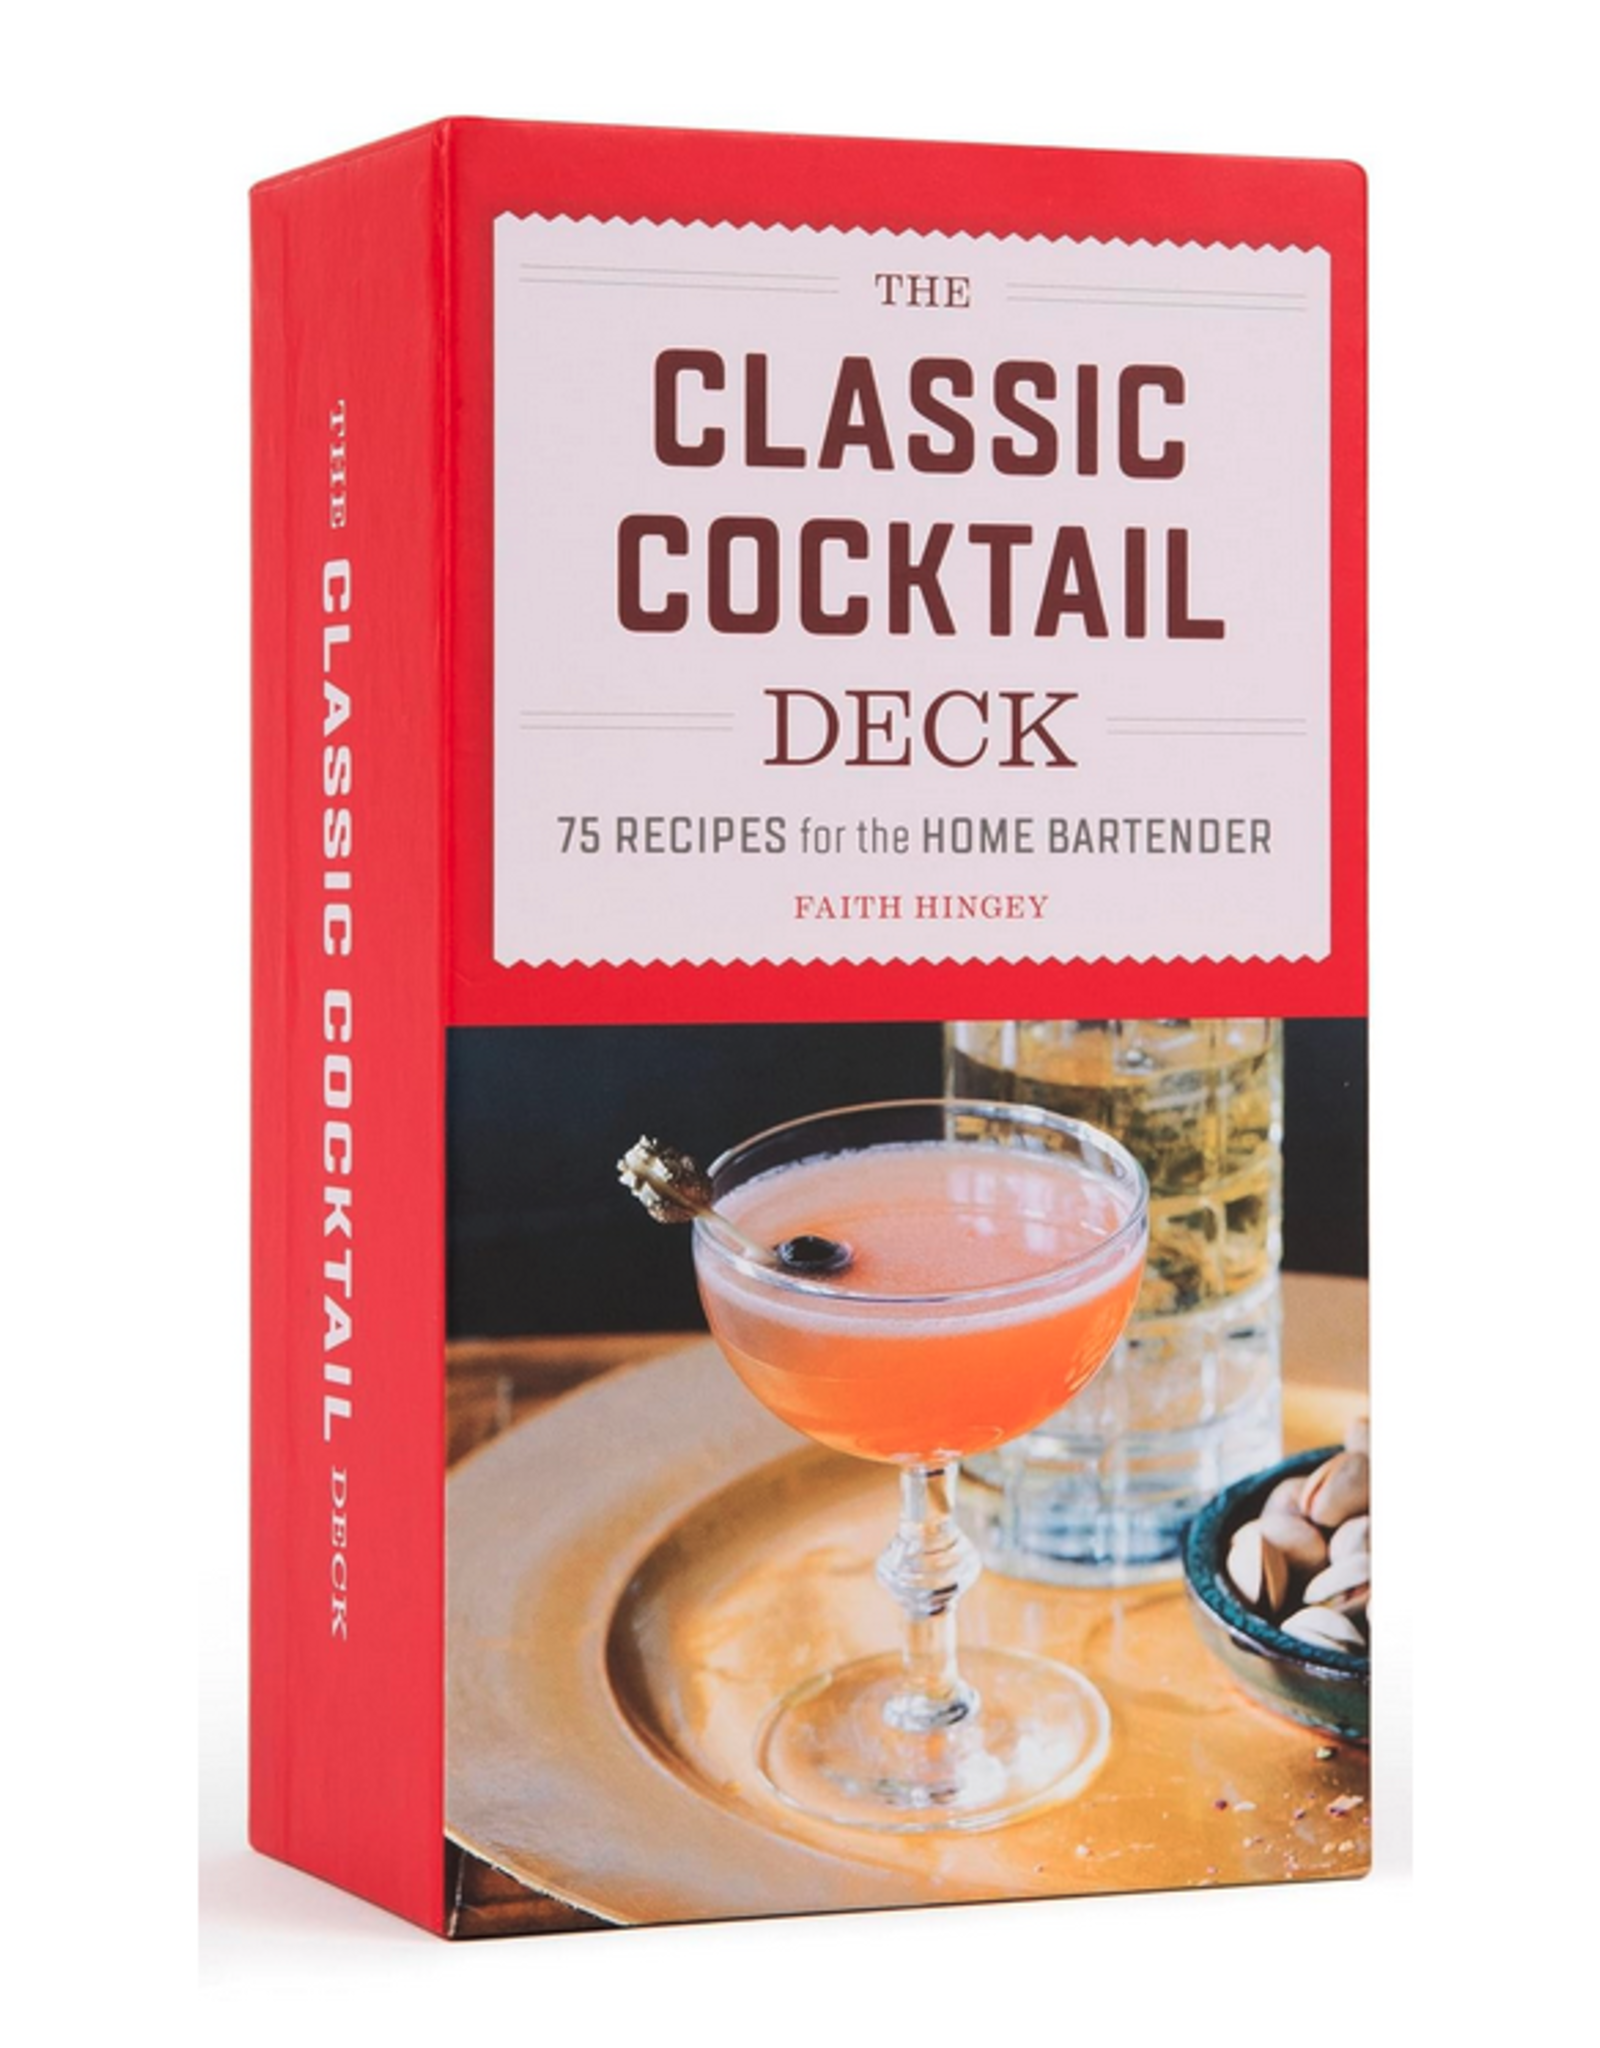 The Classic Cocktail Deck